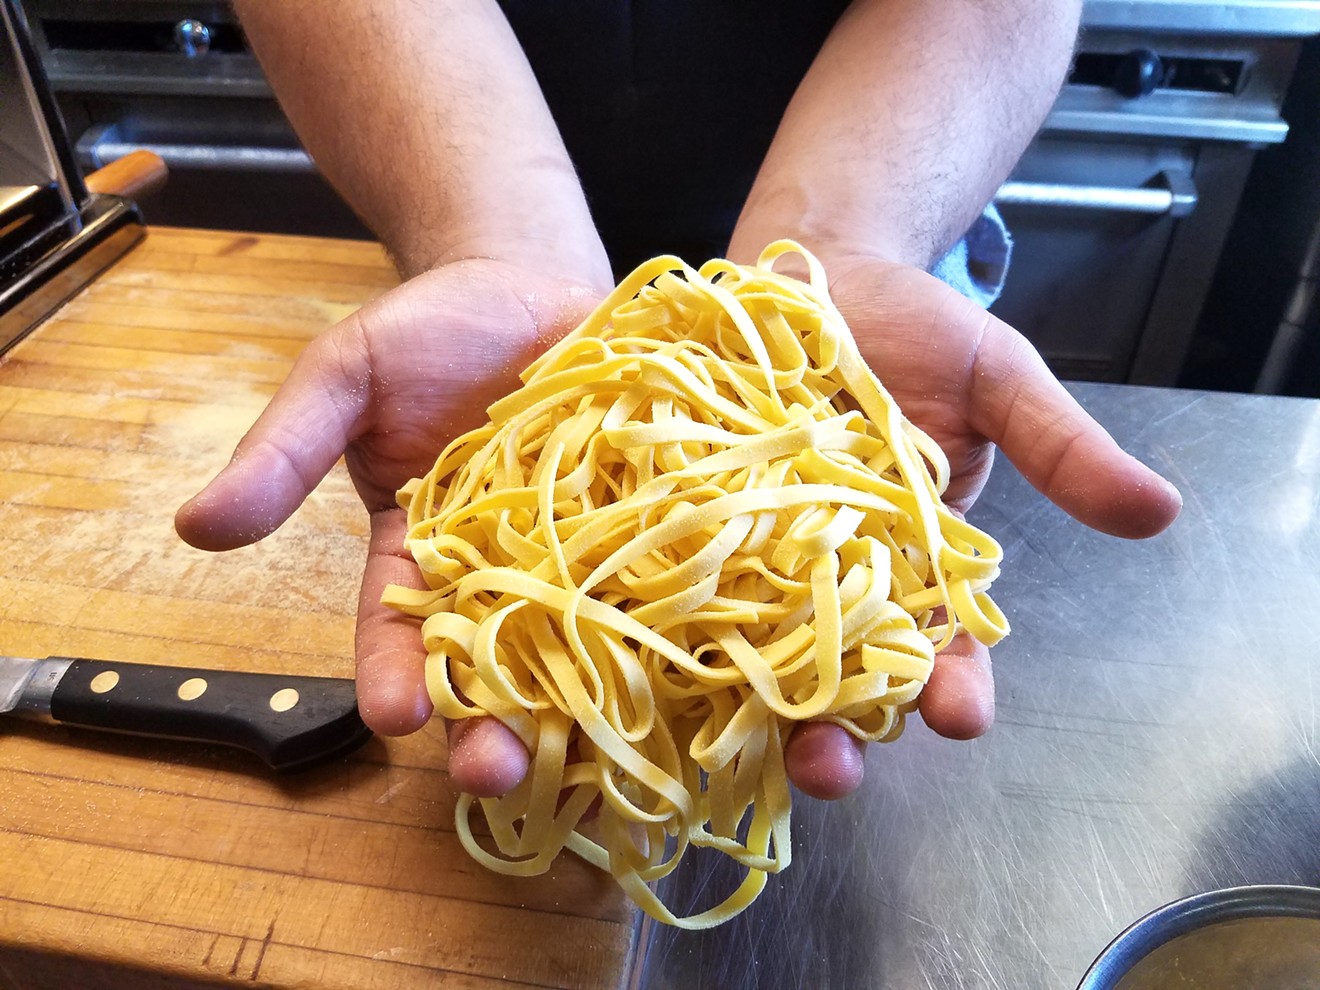 Your first attempt at making fresh pasta probably won't look like a pro's, but keep trying. You've got oodles of time to perfect your noodles.